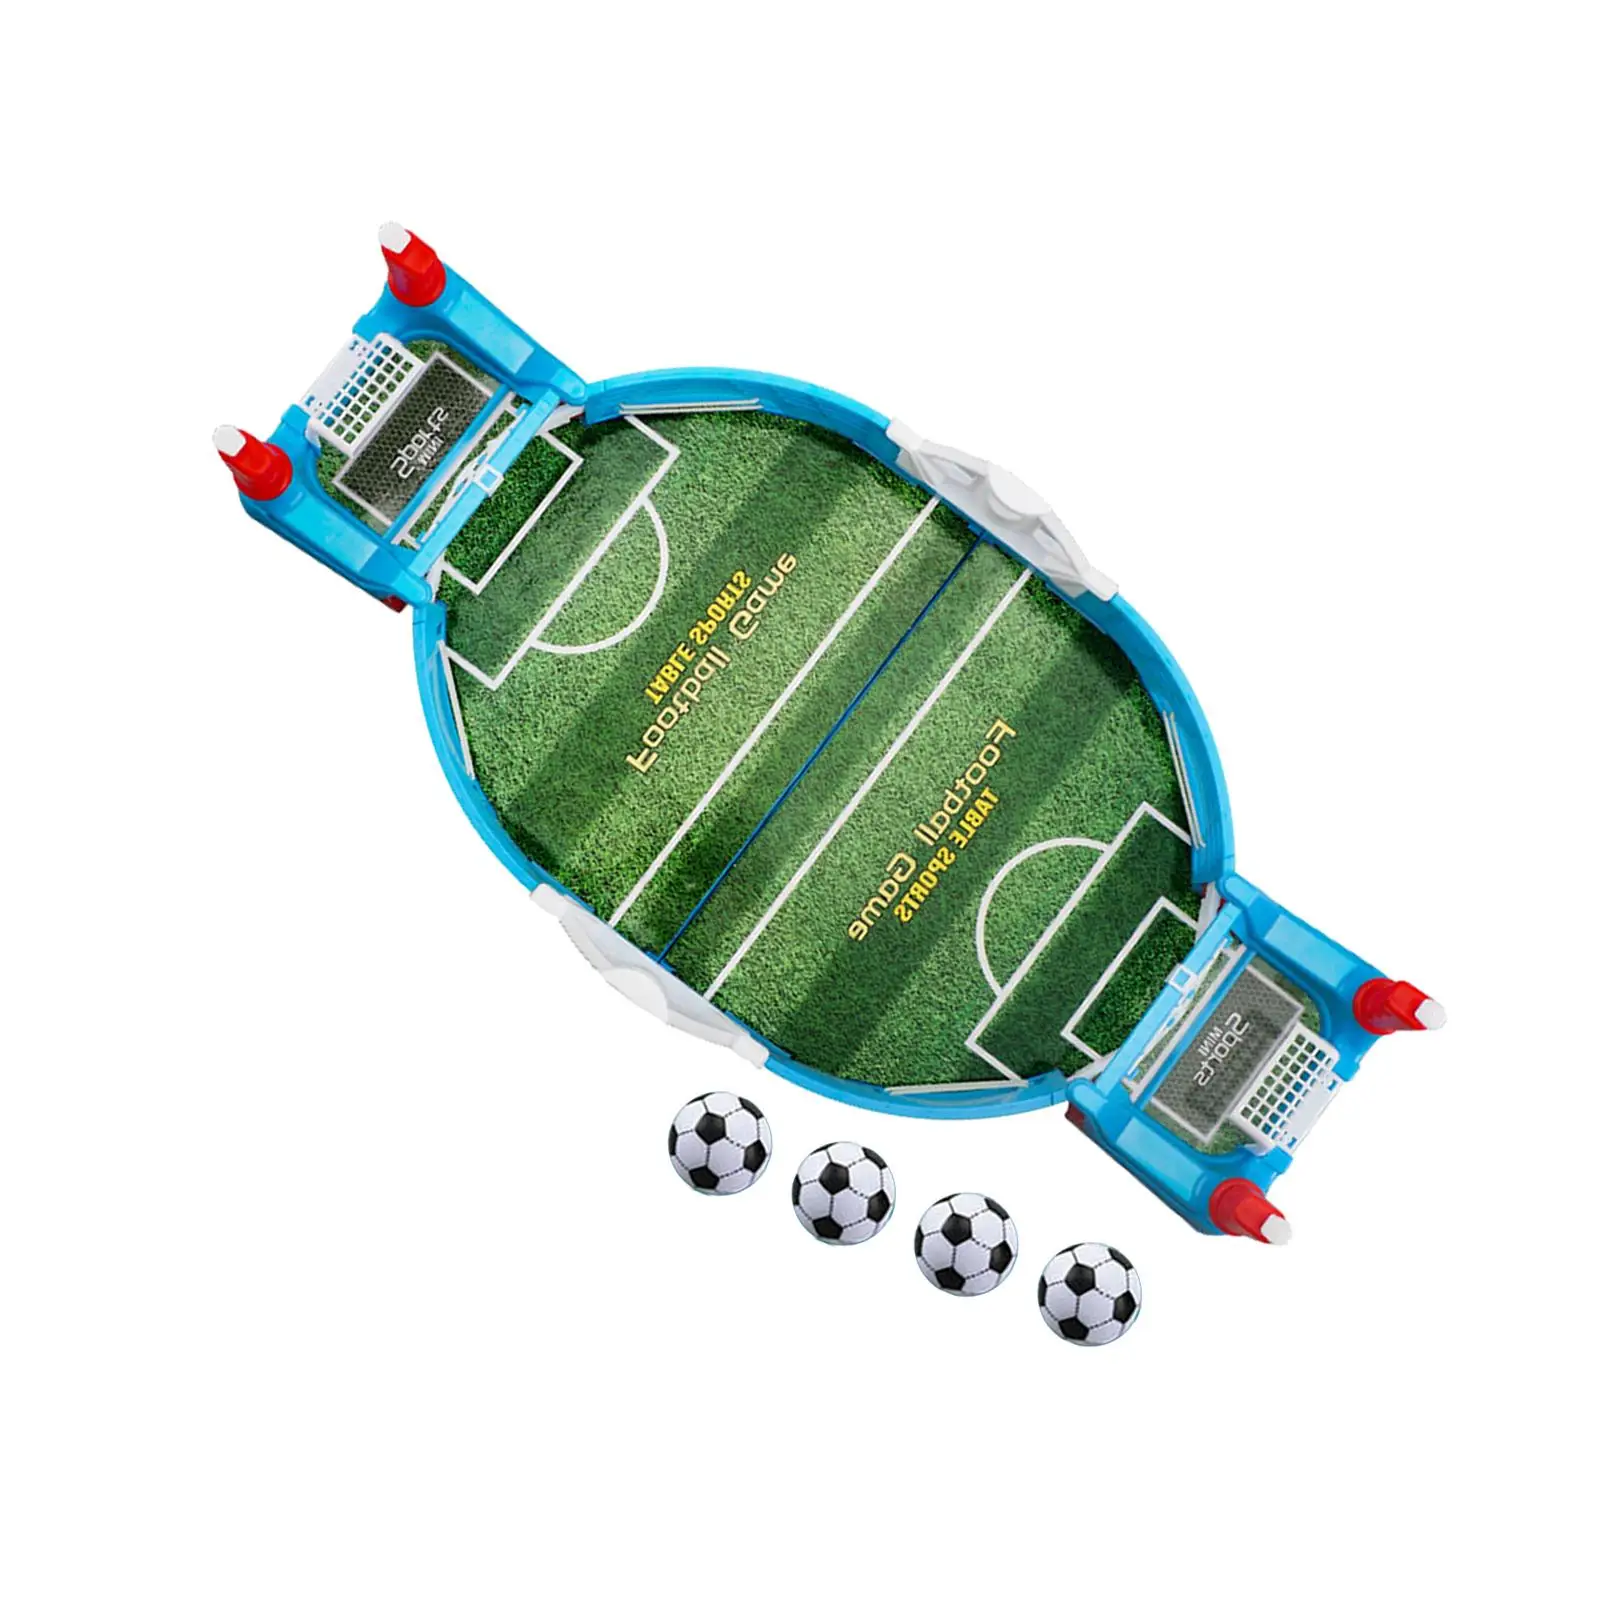 Desktop Football Board Games Kit Toy Sports Table Board Football Game Interactive Toys Funny Football Game for Boys Family Girls